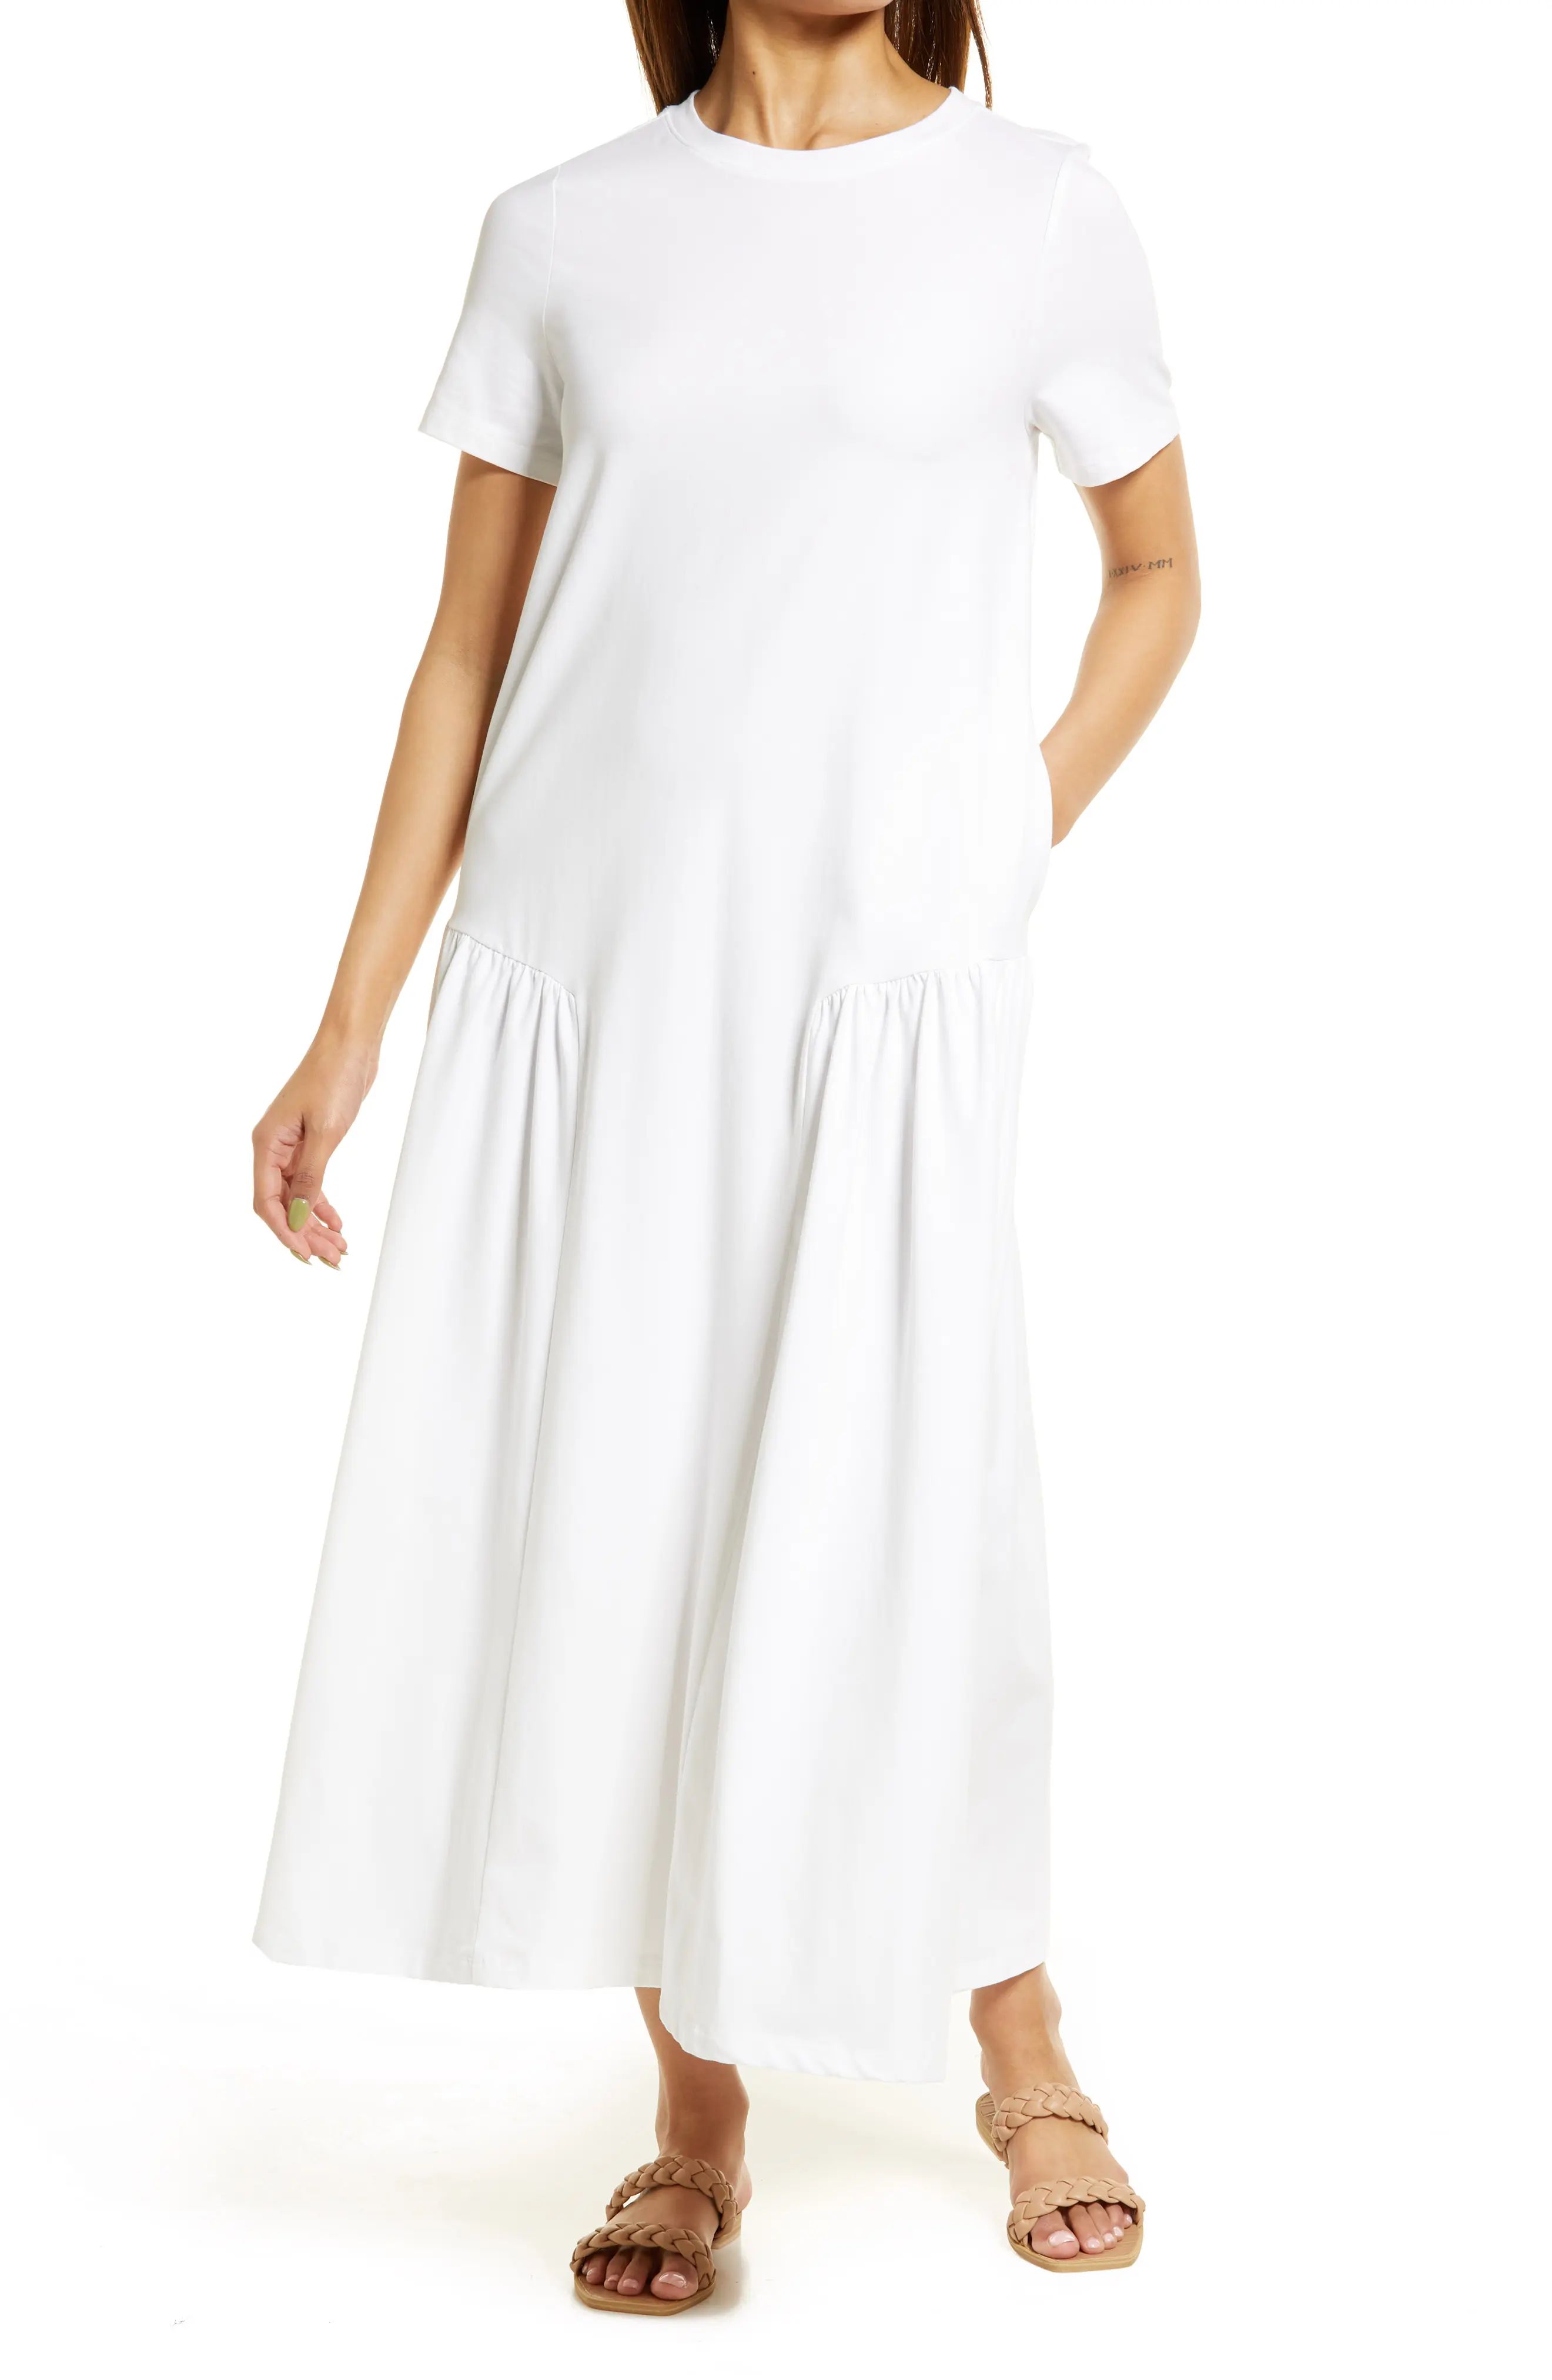 Nordstrom Gathered Stretch Cotton T-Shirt Dress in White at Nordstrom, Size X-Large | Nordstrom